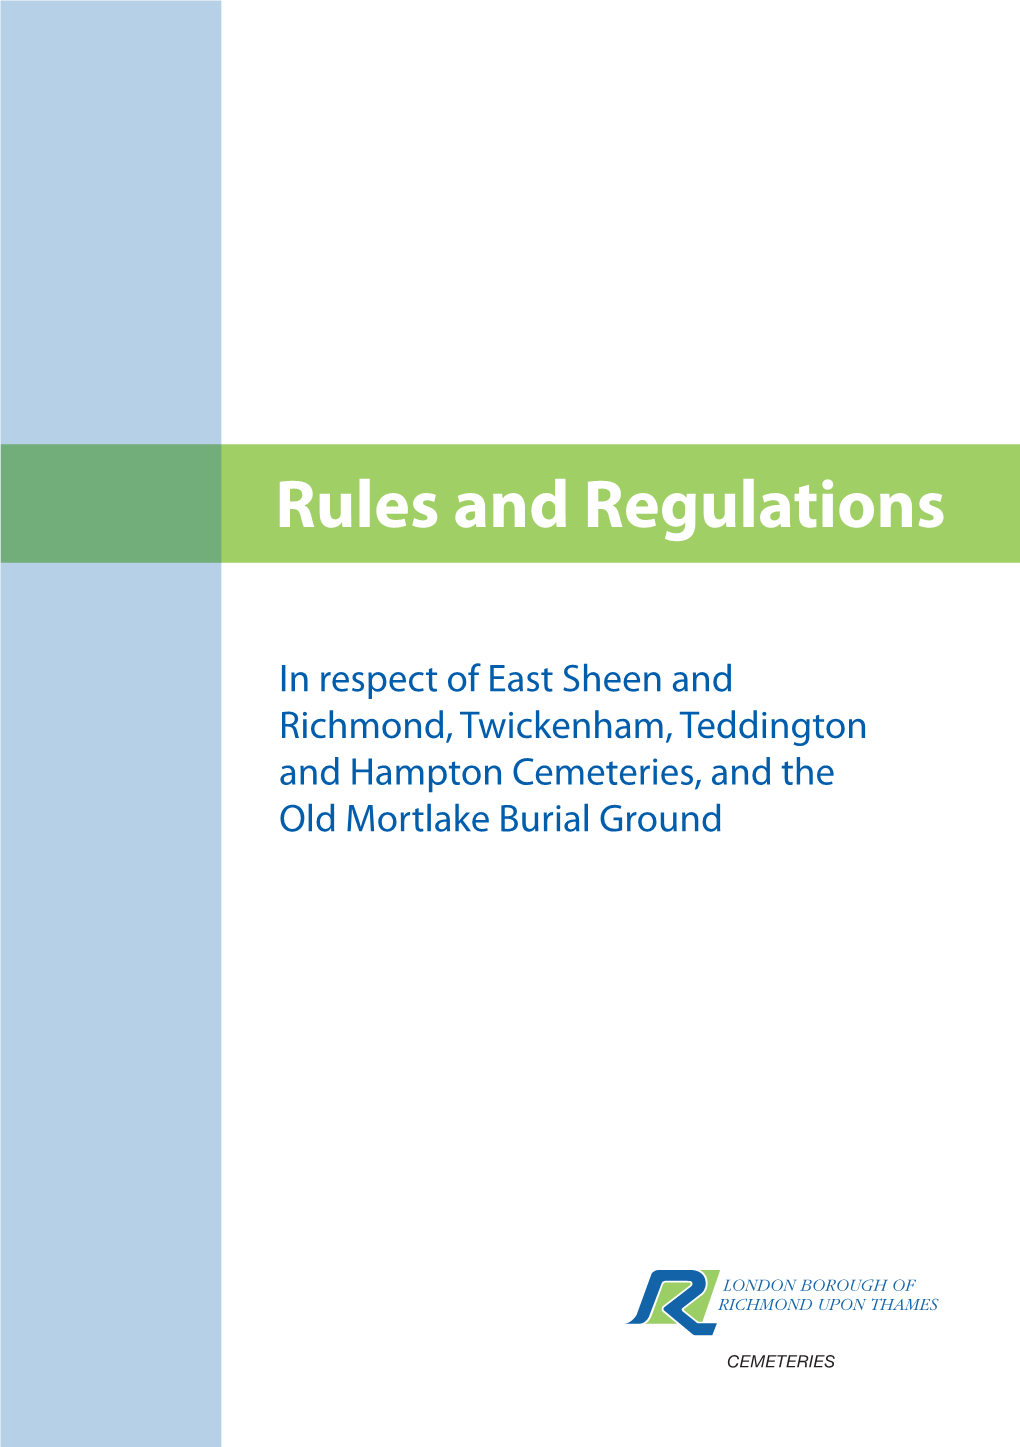 Cemetery Rules and Regulations Booklet